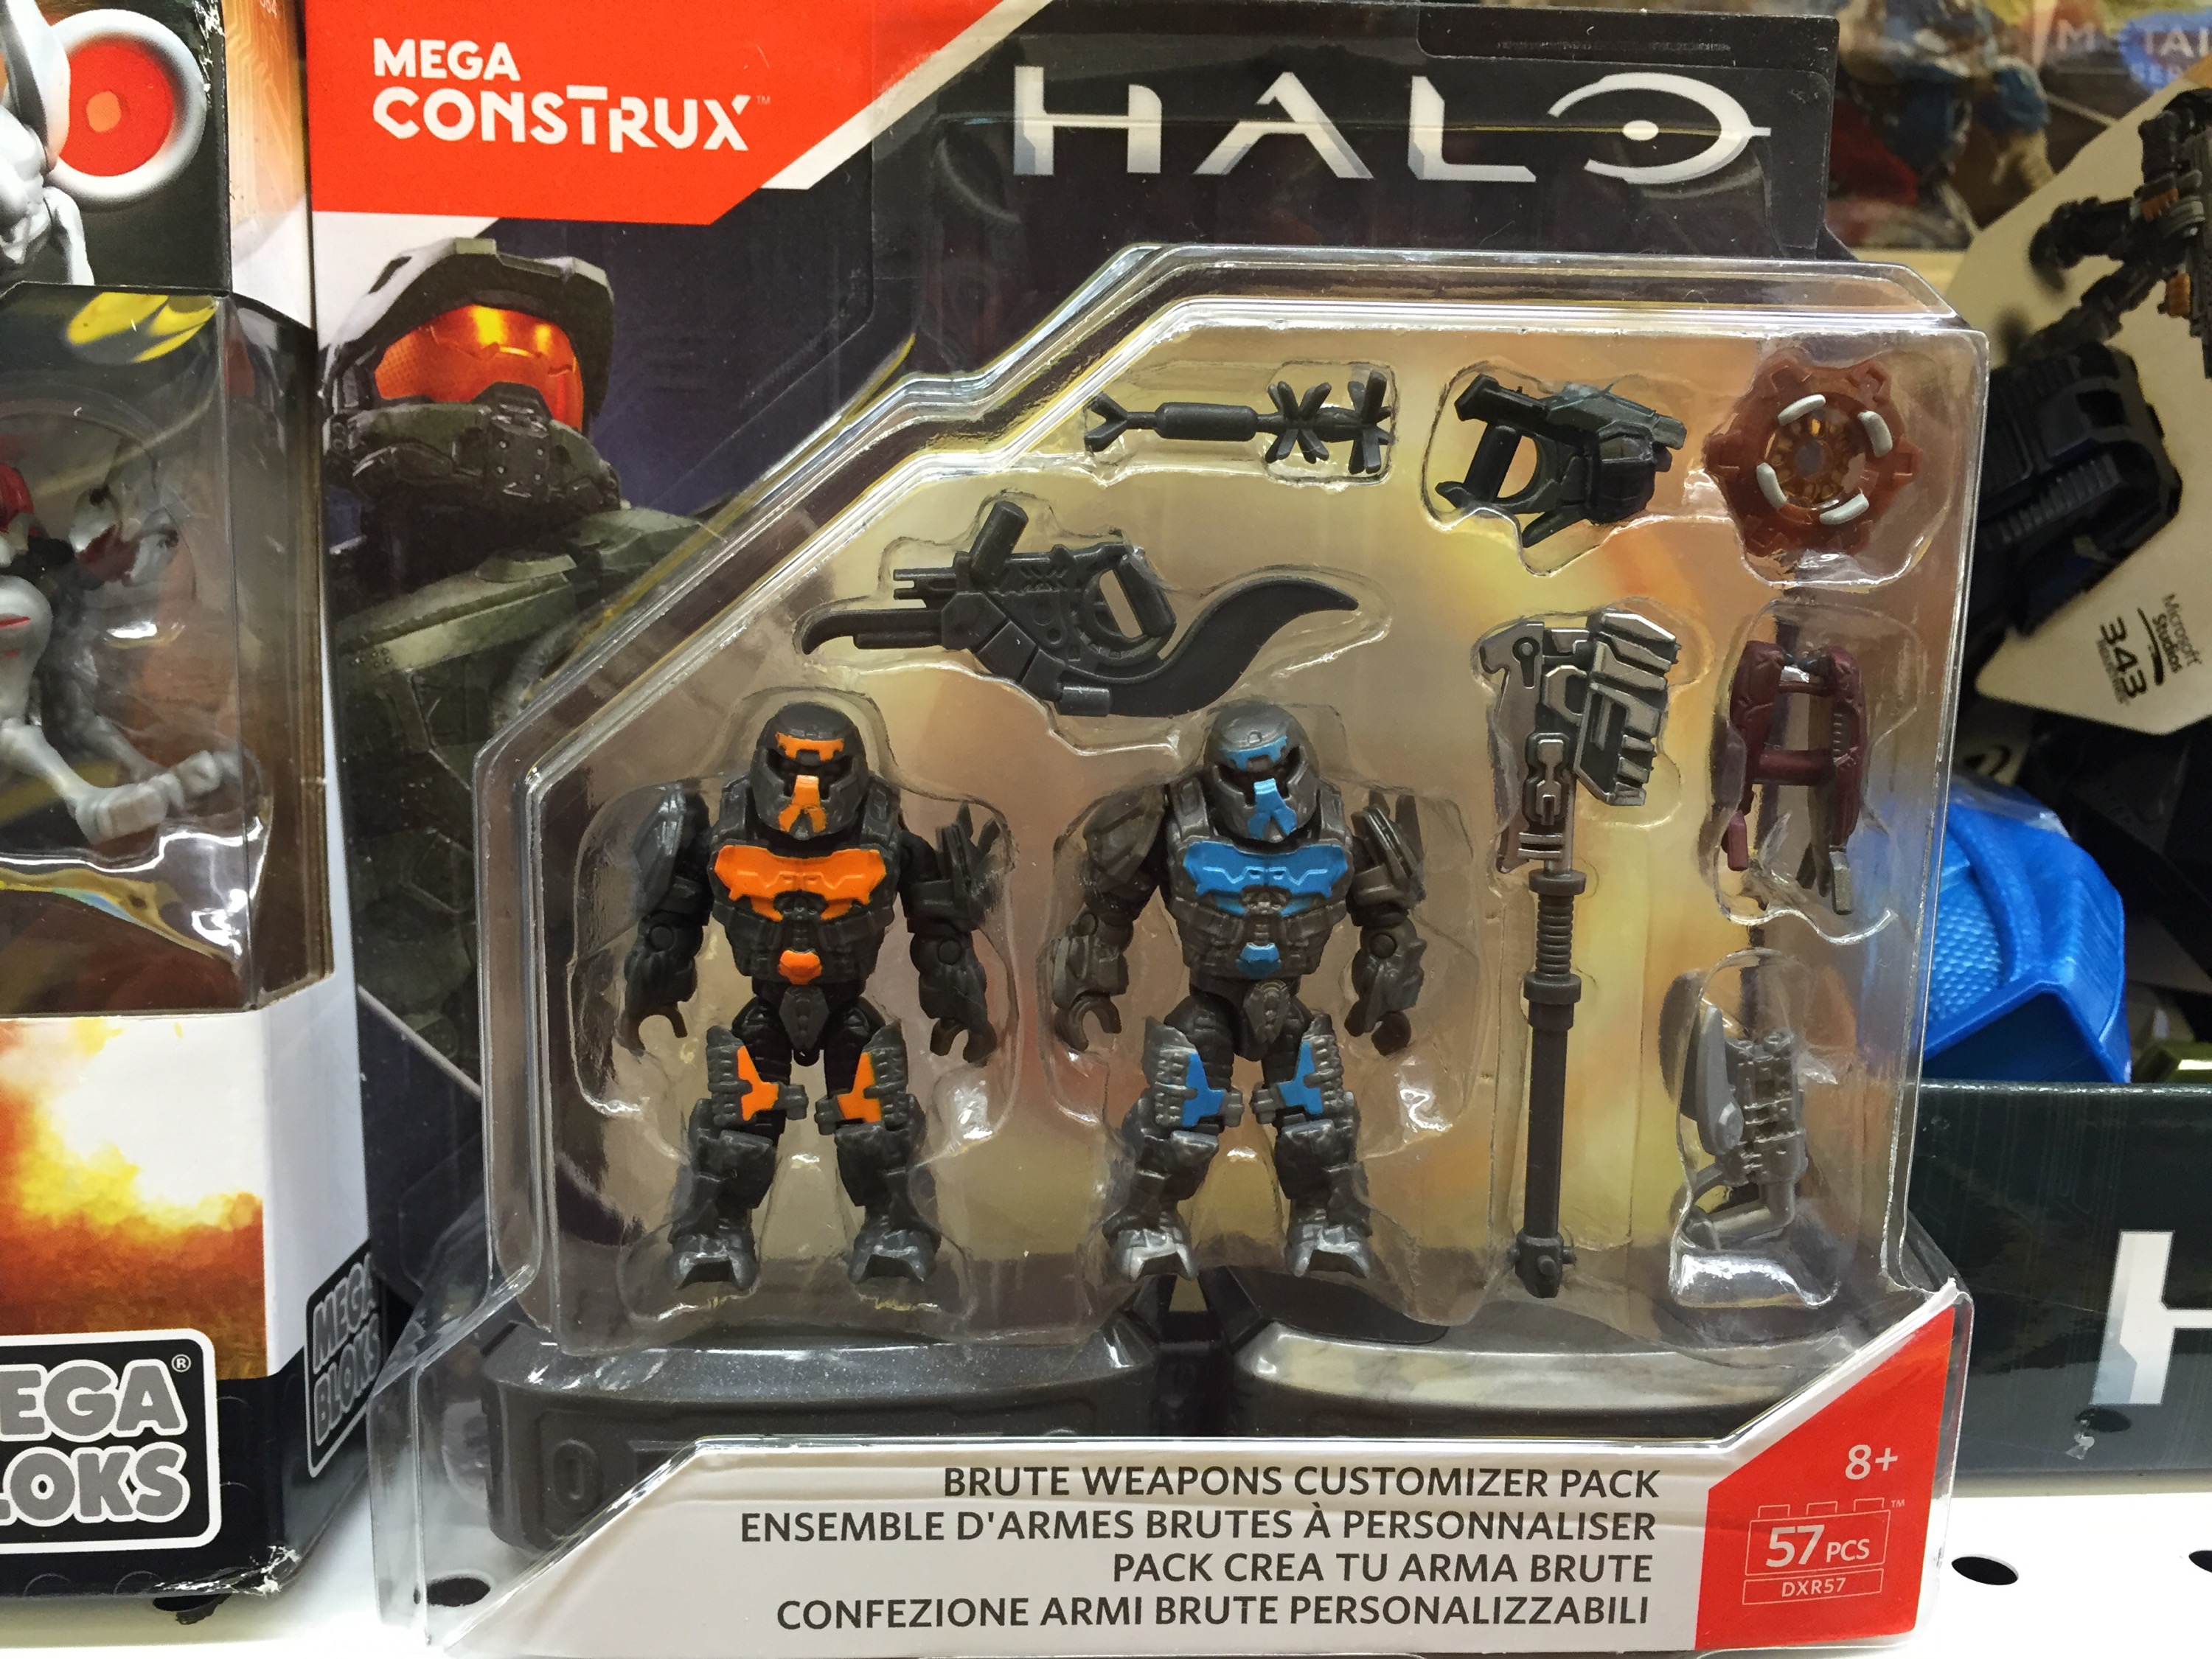 Mega Construx Halo Wars 2 Brute Customizer Pack! - Gamer Toy News